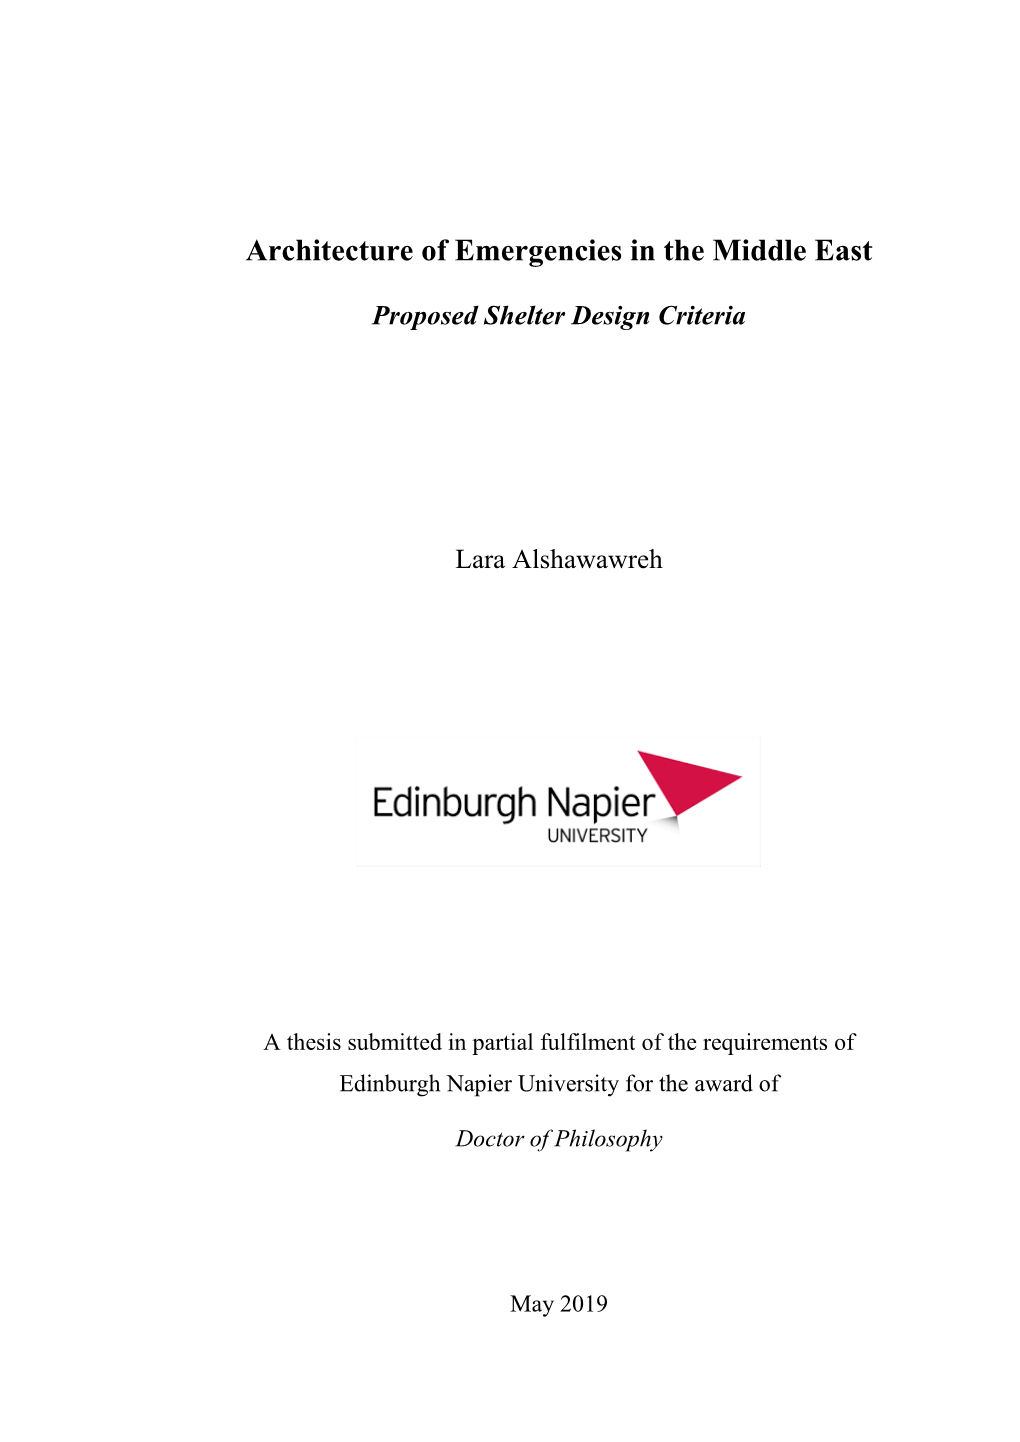 Architecture of Emergencies in the Middle East: Proposed Shelter